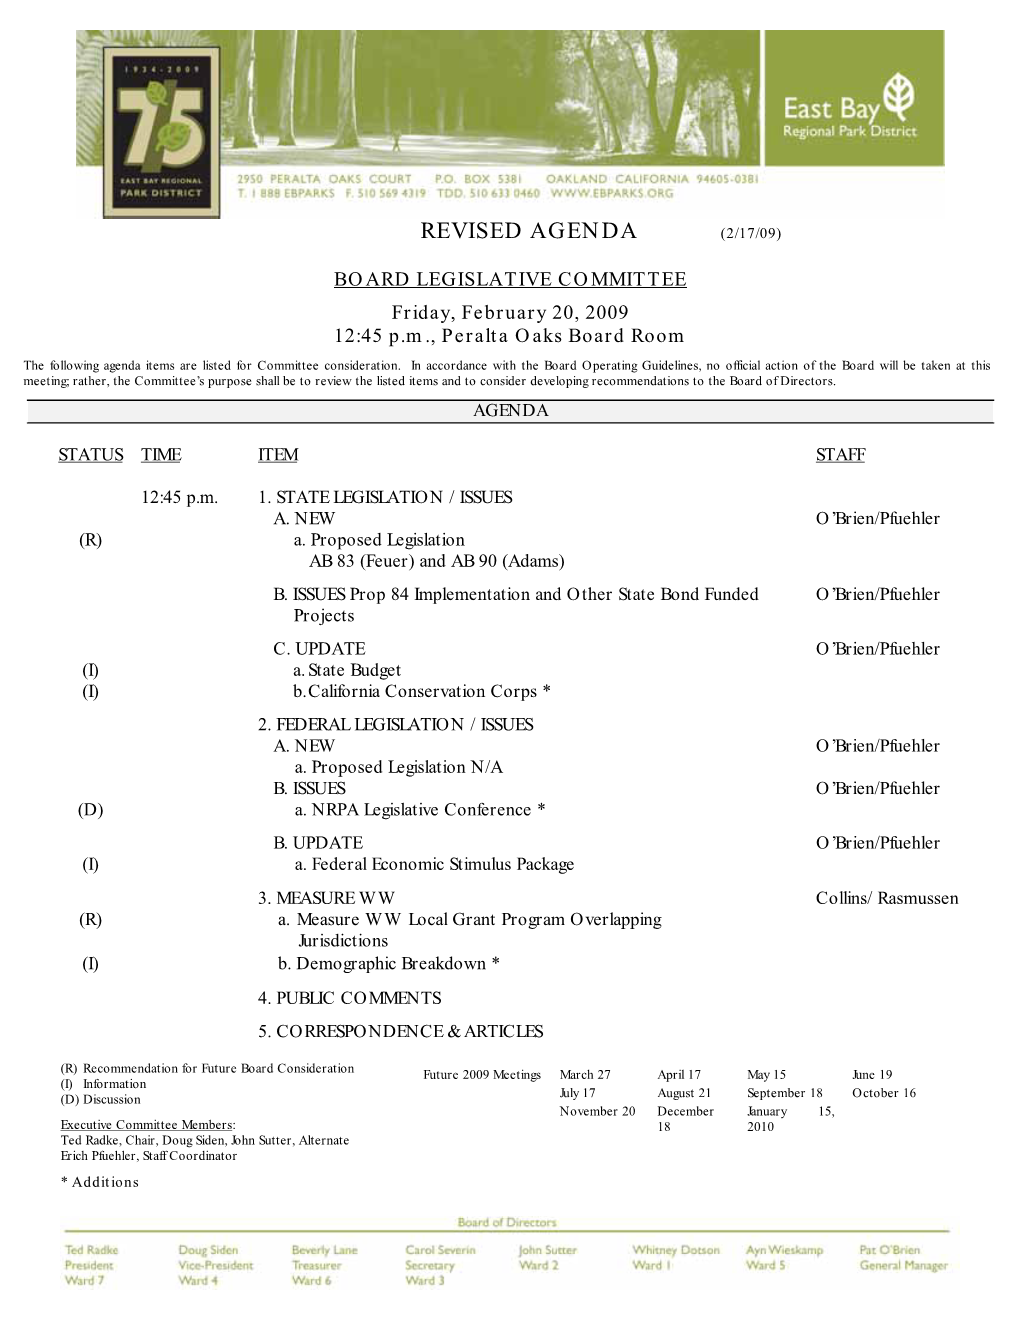 BOARD LEGISLATIVE COMMITTEE Friday, February 20, 2009 12:45 P.M., Peralta Oaks Board Room the Following Agenda Items Are Listed for Committee Consideration